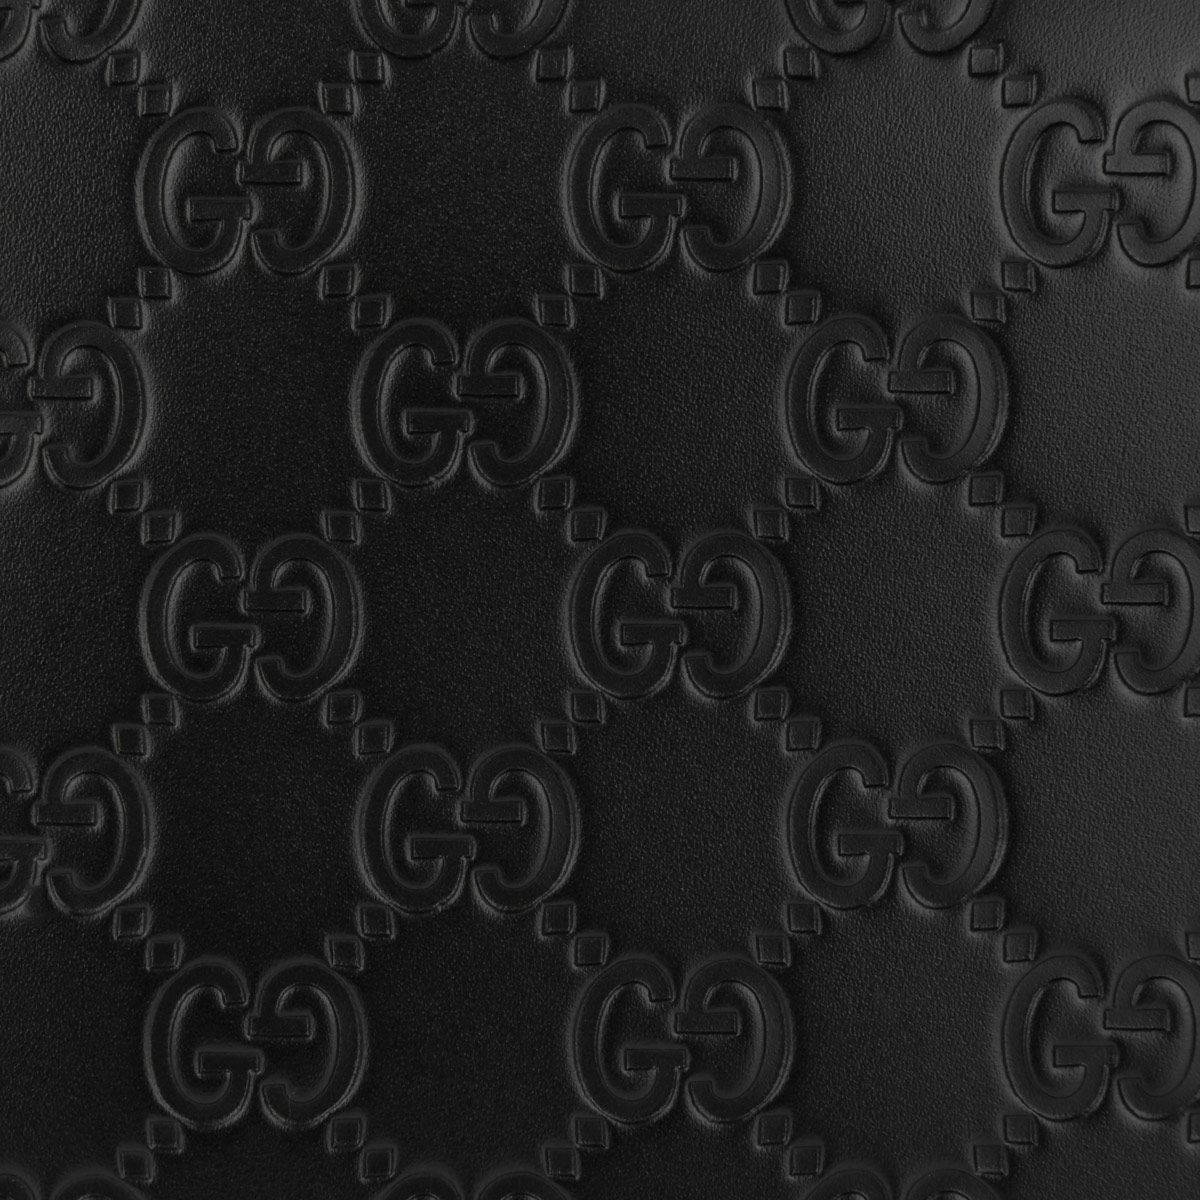 Download Black Leather Gucci Pattern Wallpaper | Wallpapers.com